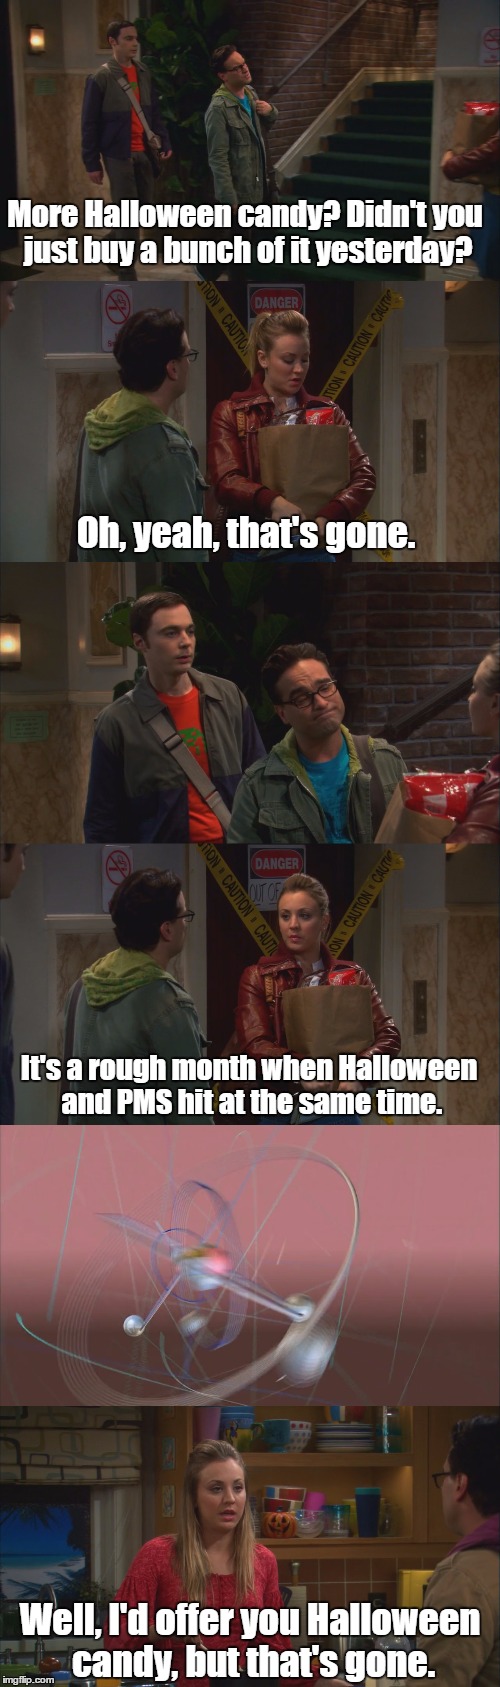 TBBT S05E07 | More Halloween candy? Didn't you just buy a bunch of it yesterday? Oh, yeah, that's gone. It's a rough month when Halloween and PMS hit at the same time. Well, I'd offer you Halloween candy, but that's gone. | image tagged in the big bang theory,pms,halloween | made w/ Imgflip meme maker